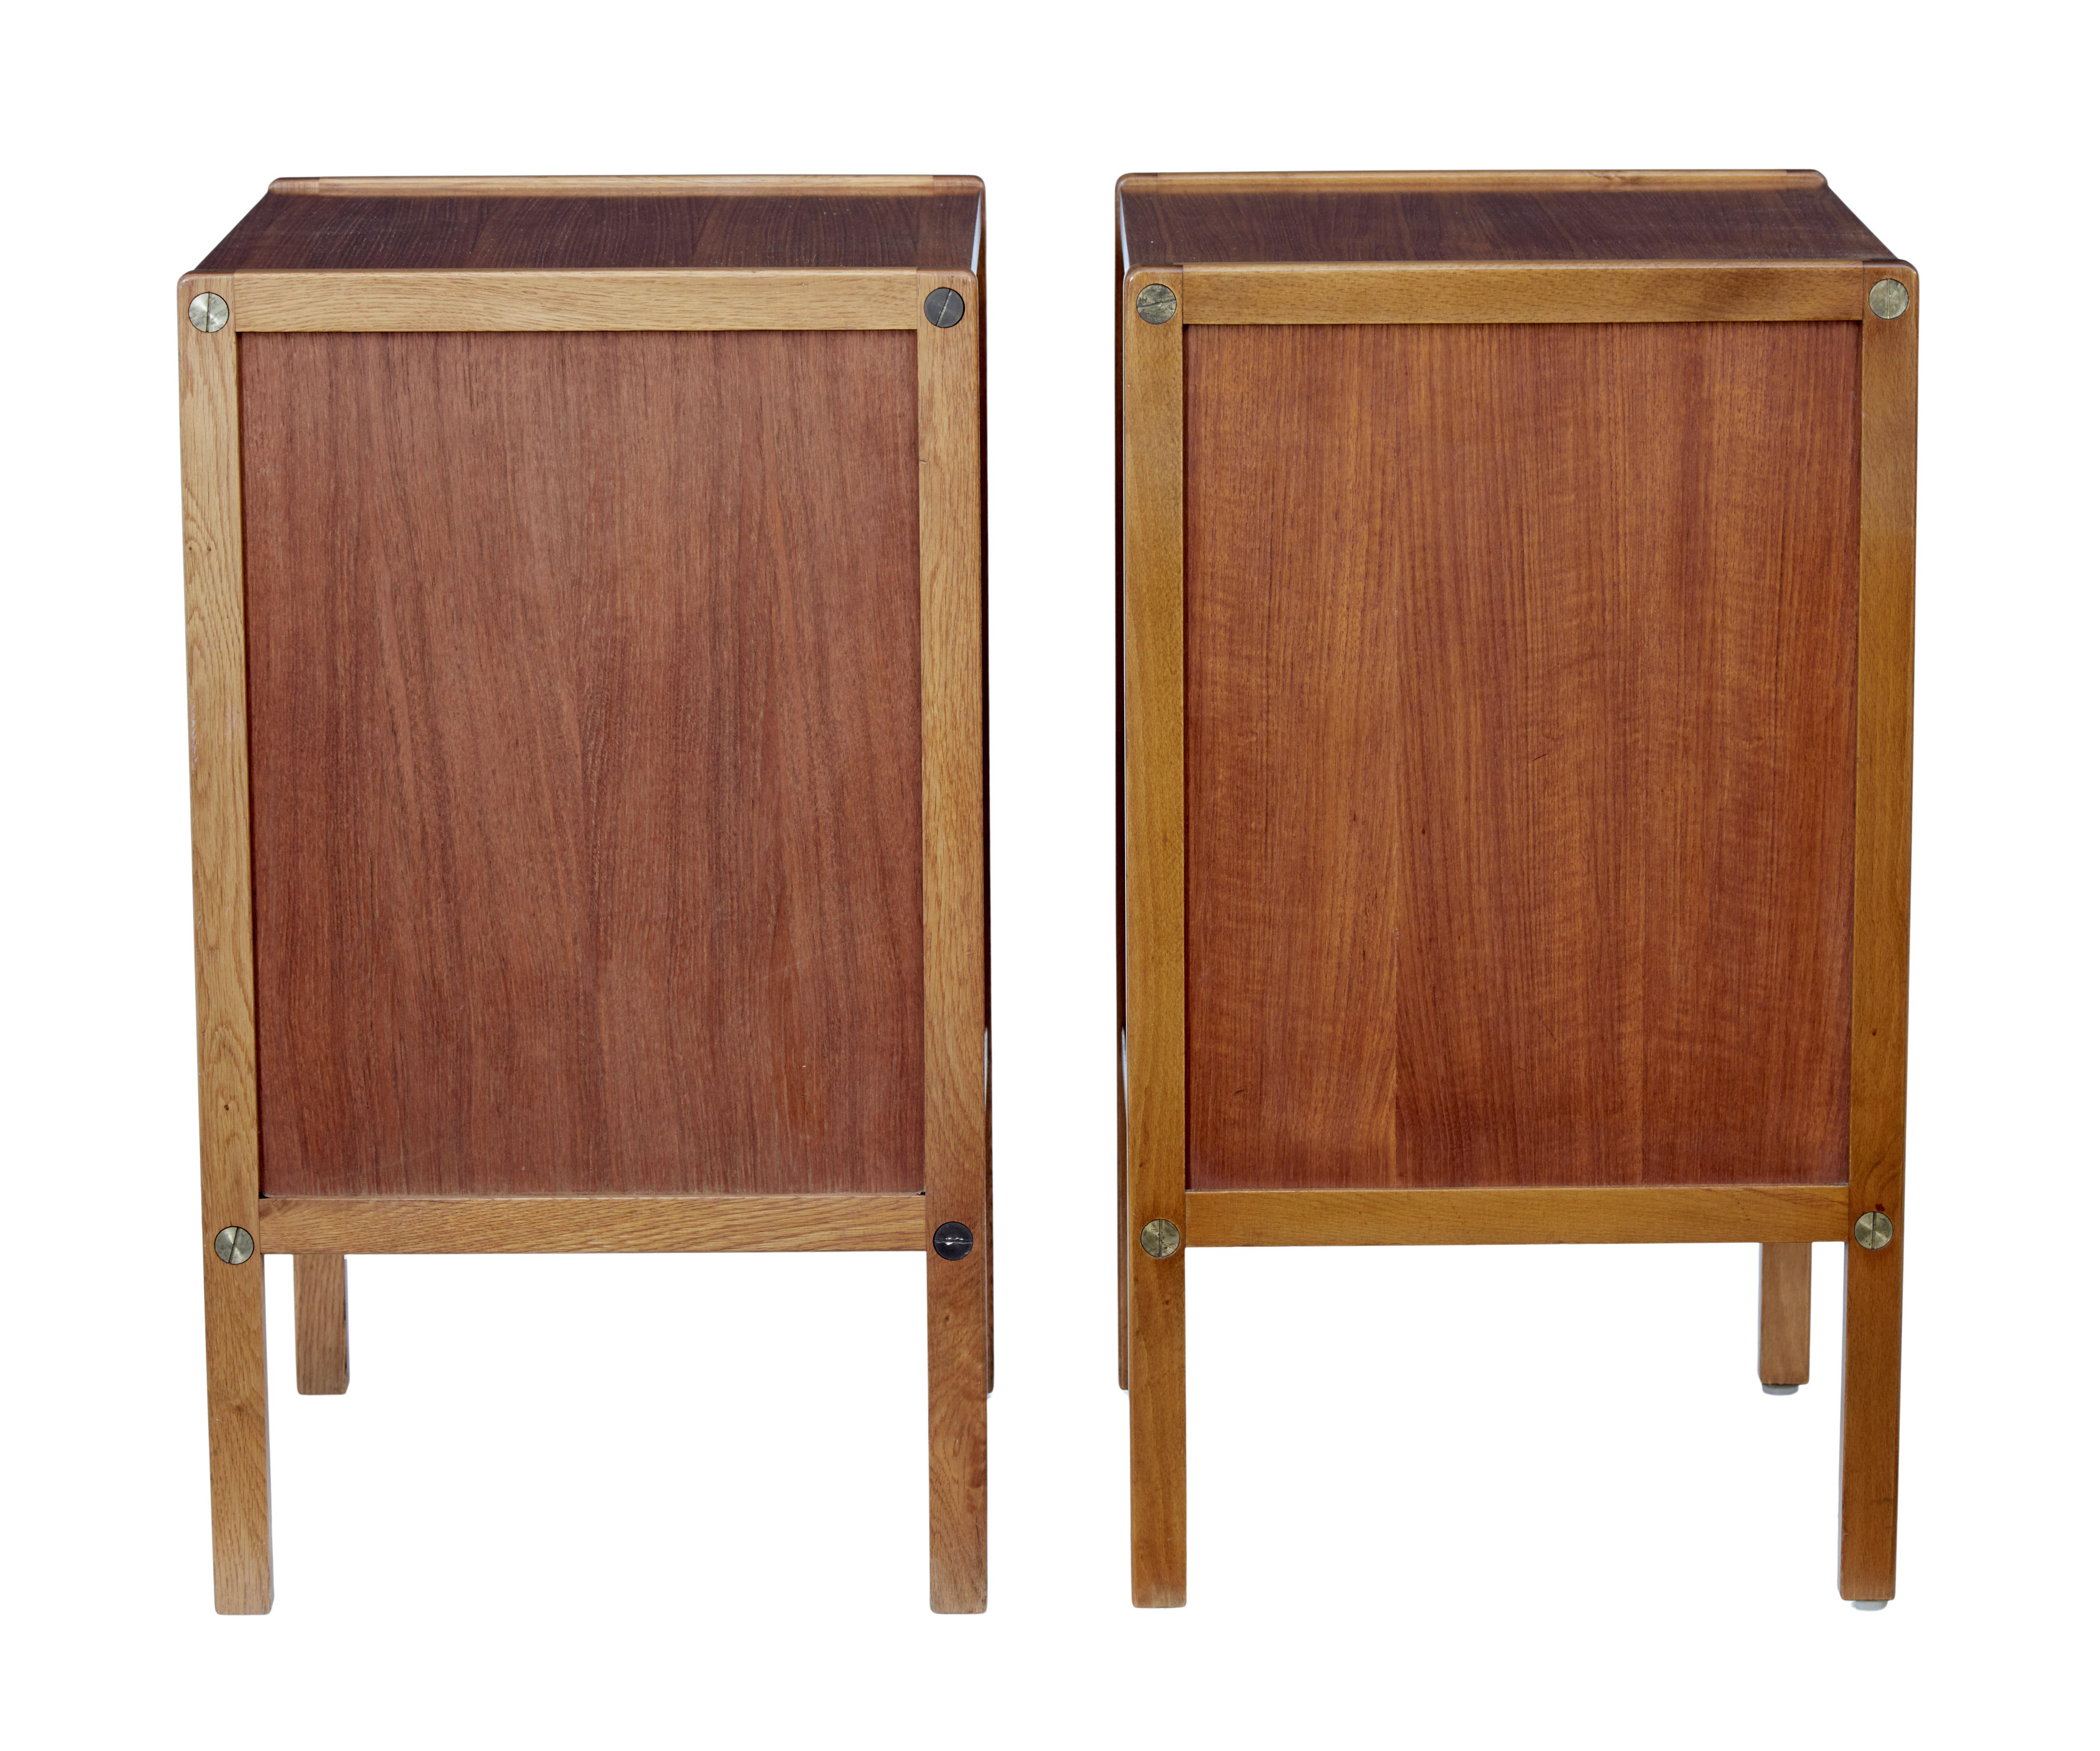 Swedish Matched Pair of Mid 20th Century Scandinavian Chests by Bodafors